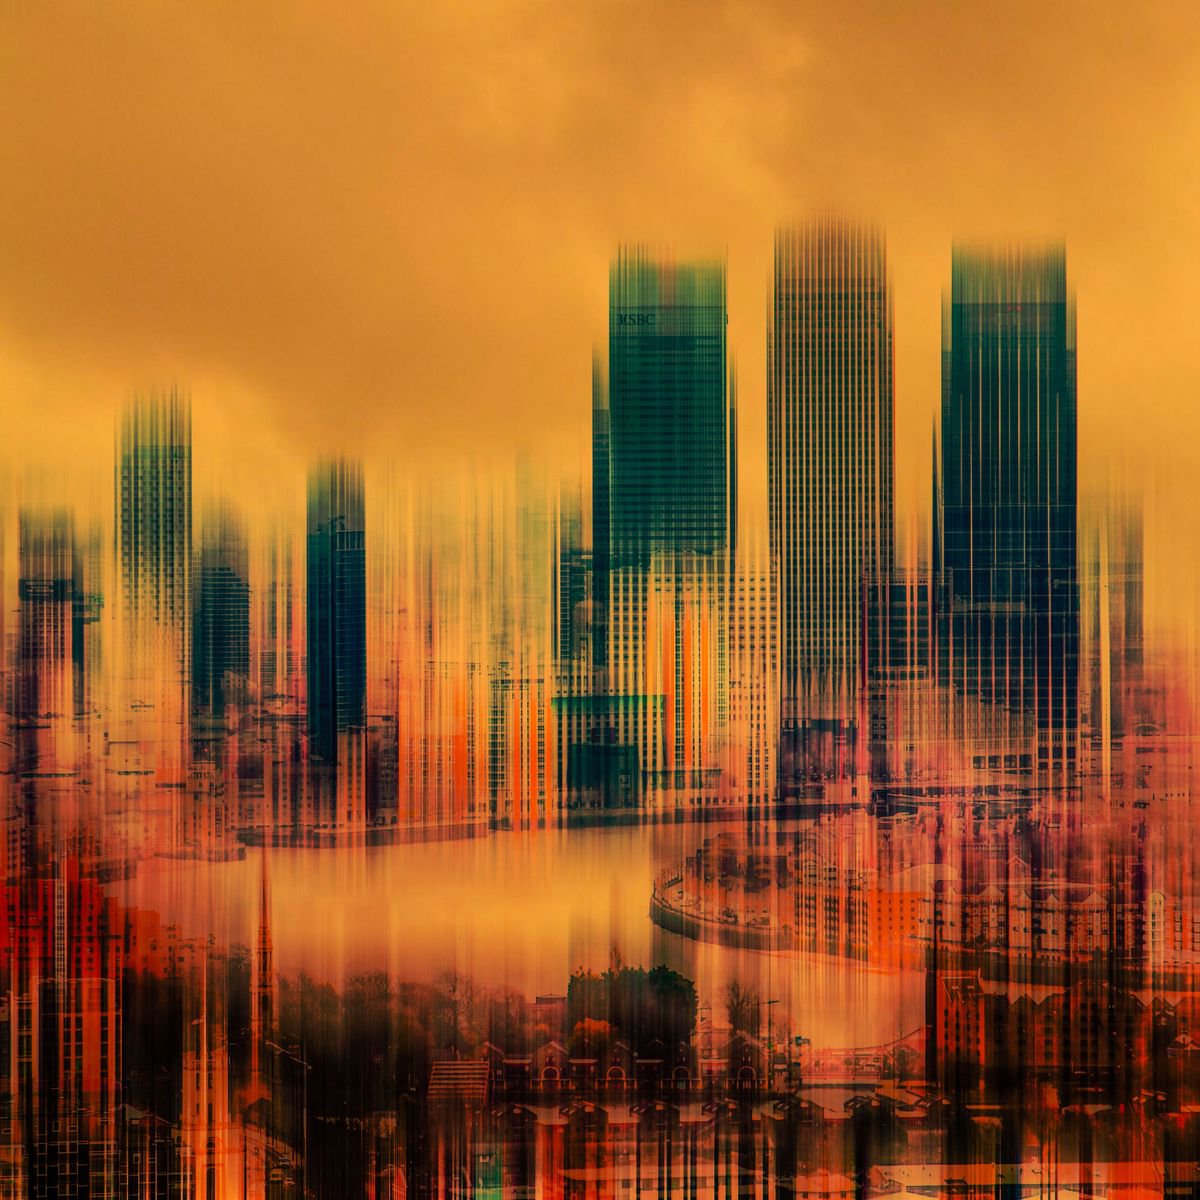 Abstract London: Canary Wharf 2 by Graham Briggs